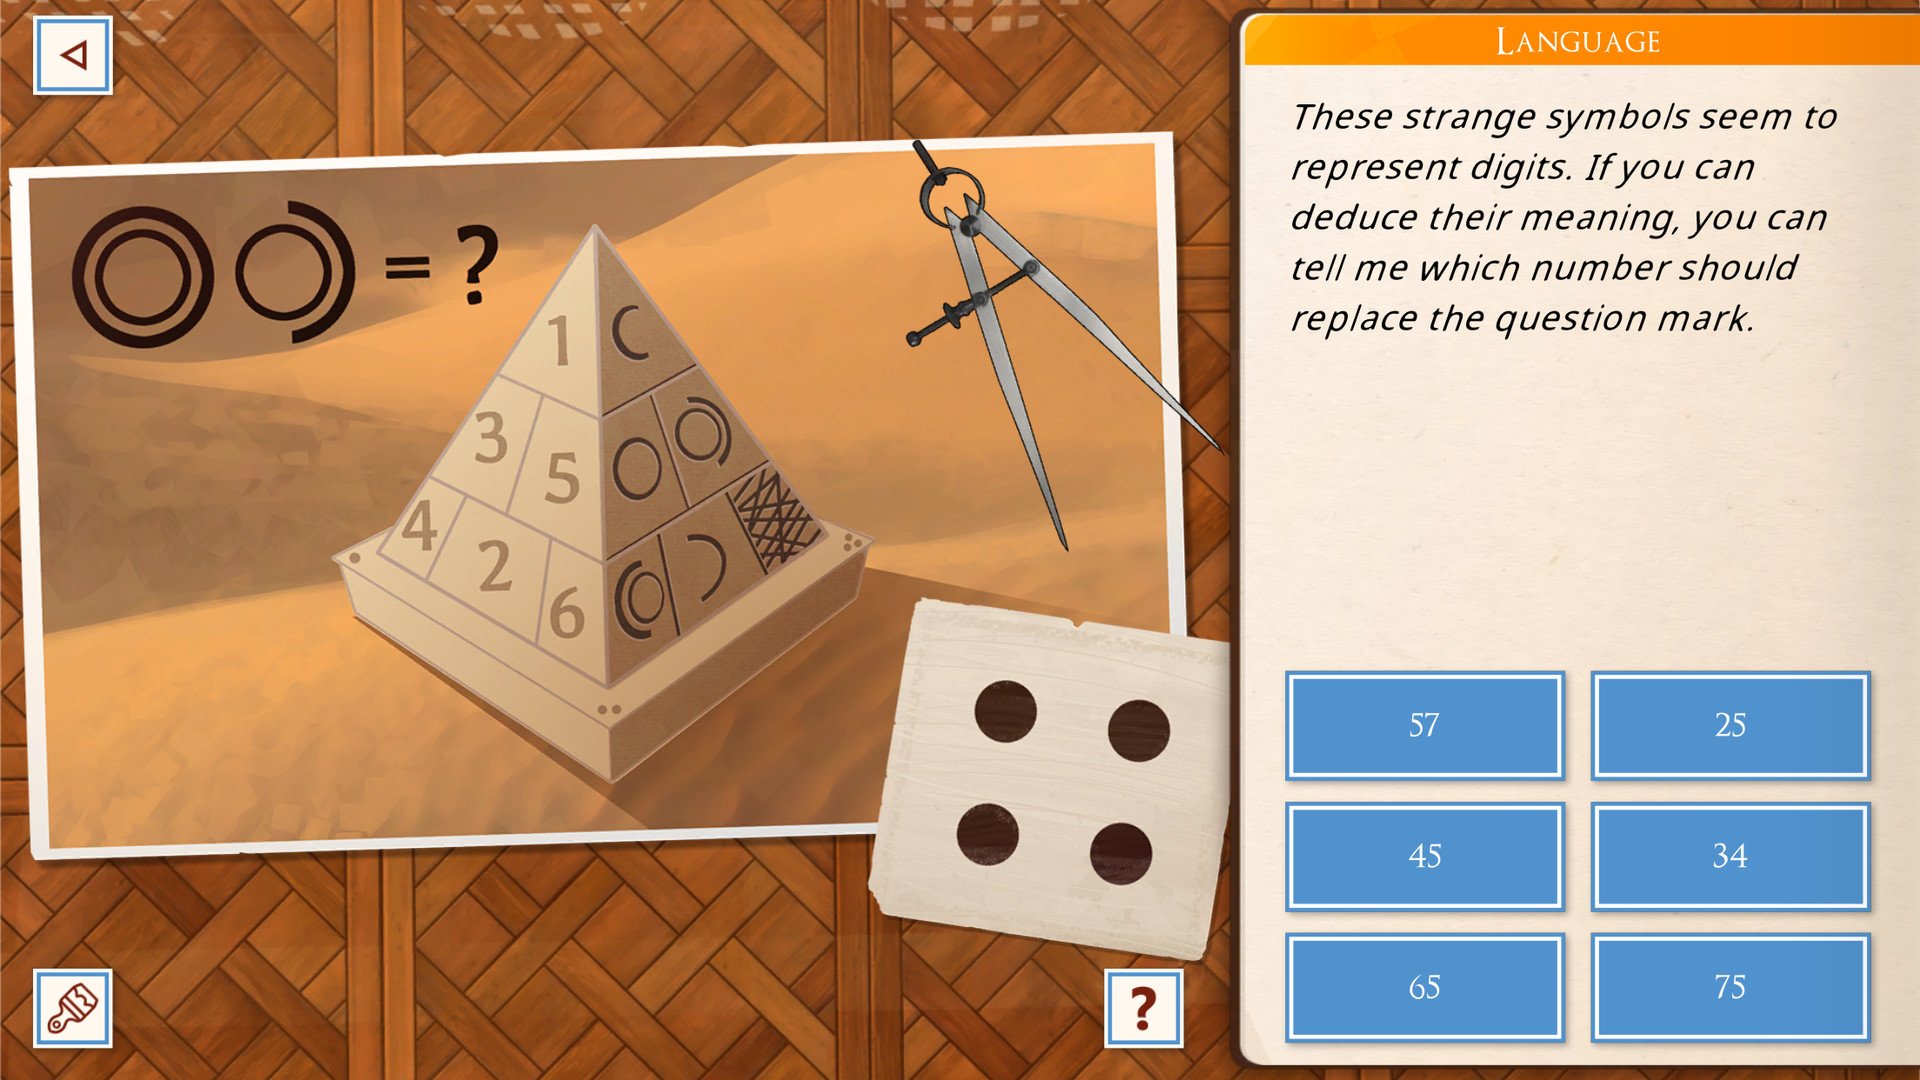 The Academy: The First Riddle Screenshot